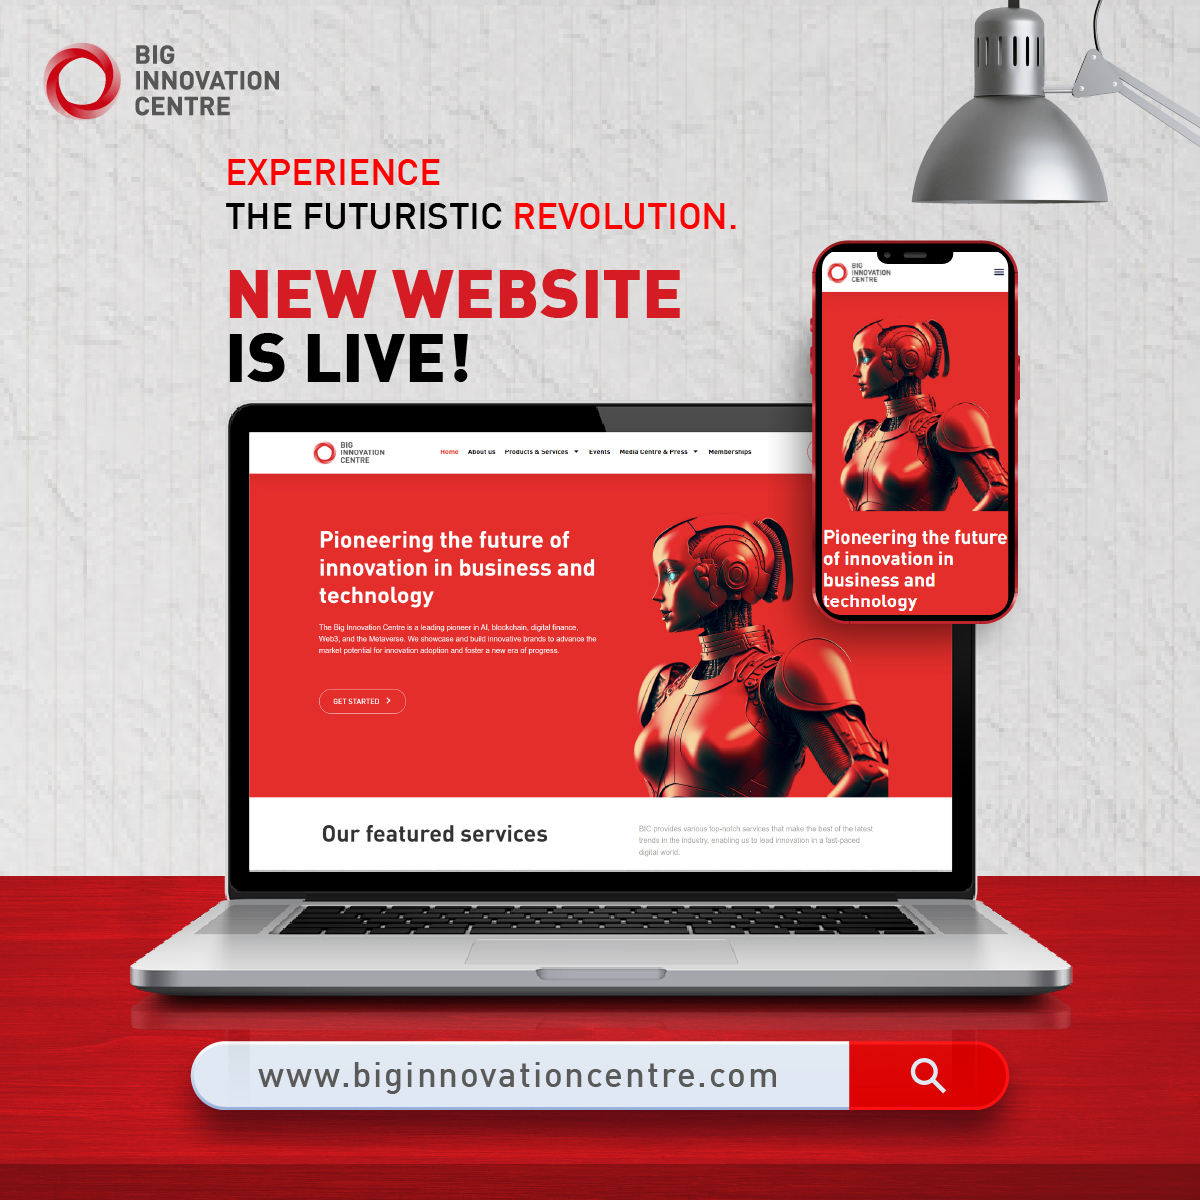 BIC's new website is LIVE! Experience a cutting-edge platform with enhanced navigation, responsive design and in-depth insights into our innovative work. Explore now: biginnovationcentre.com #BigInnovationCentre #NewWebsite #Innovation #OfficialLaunch